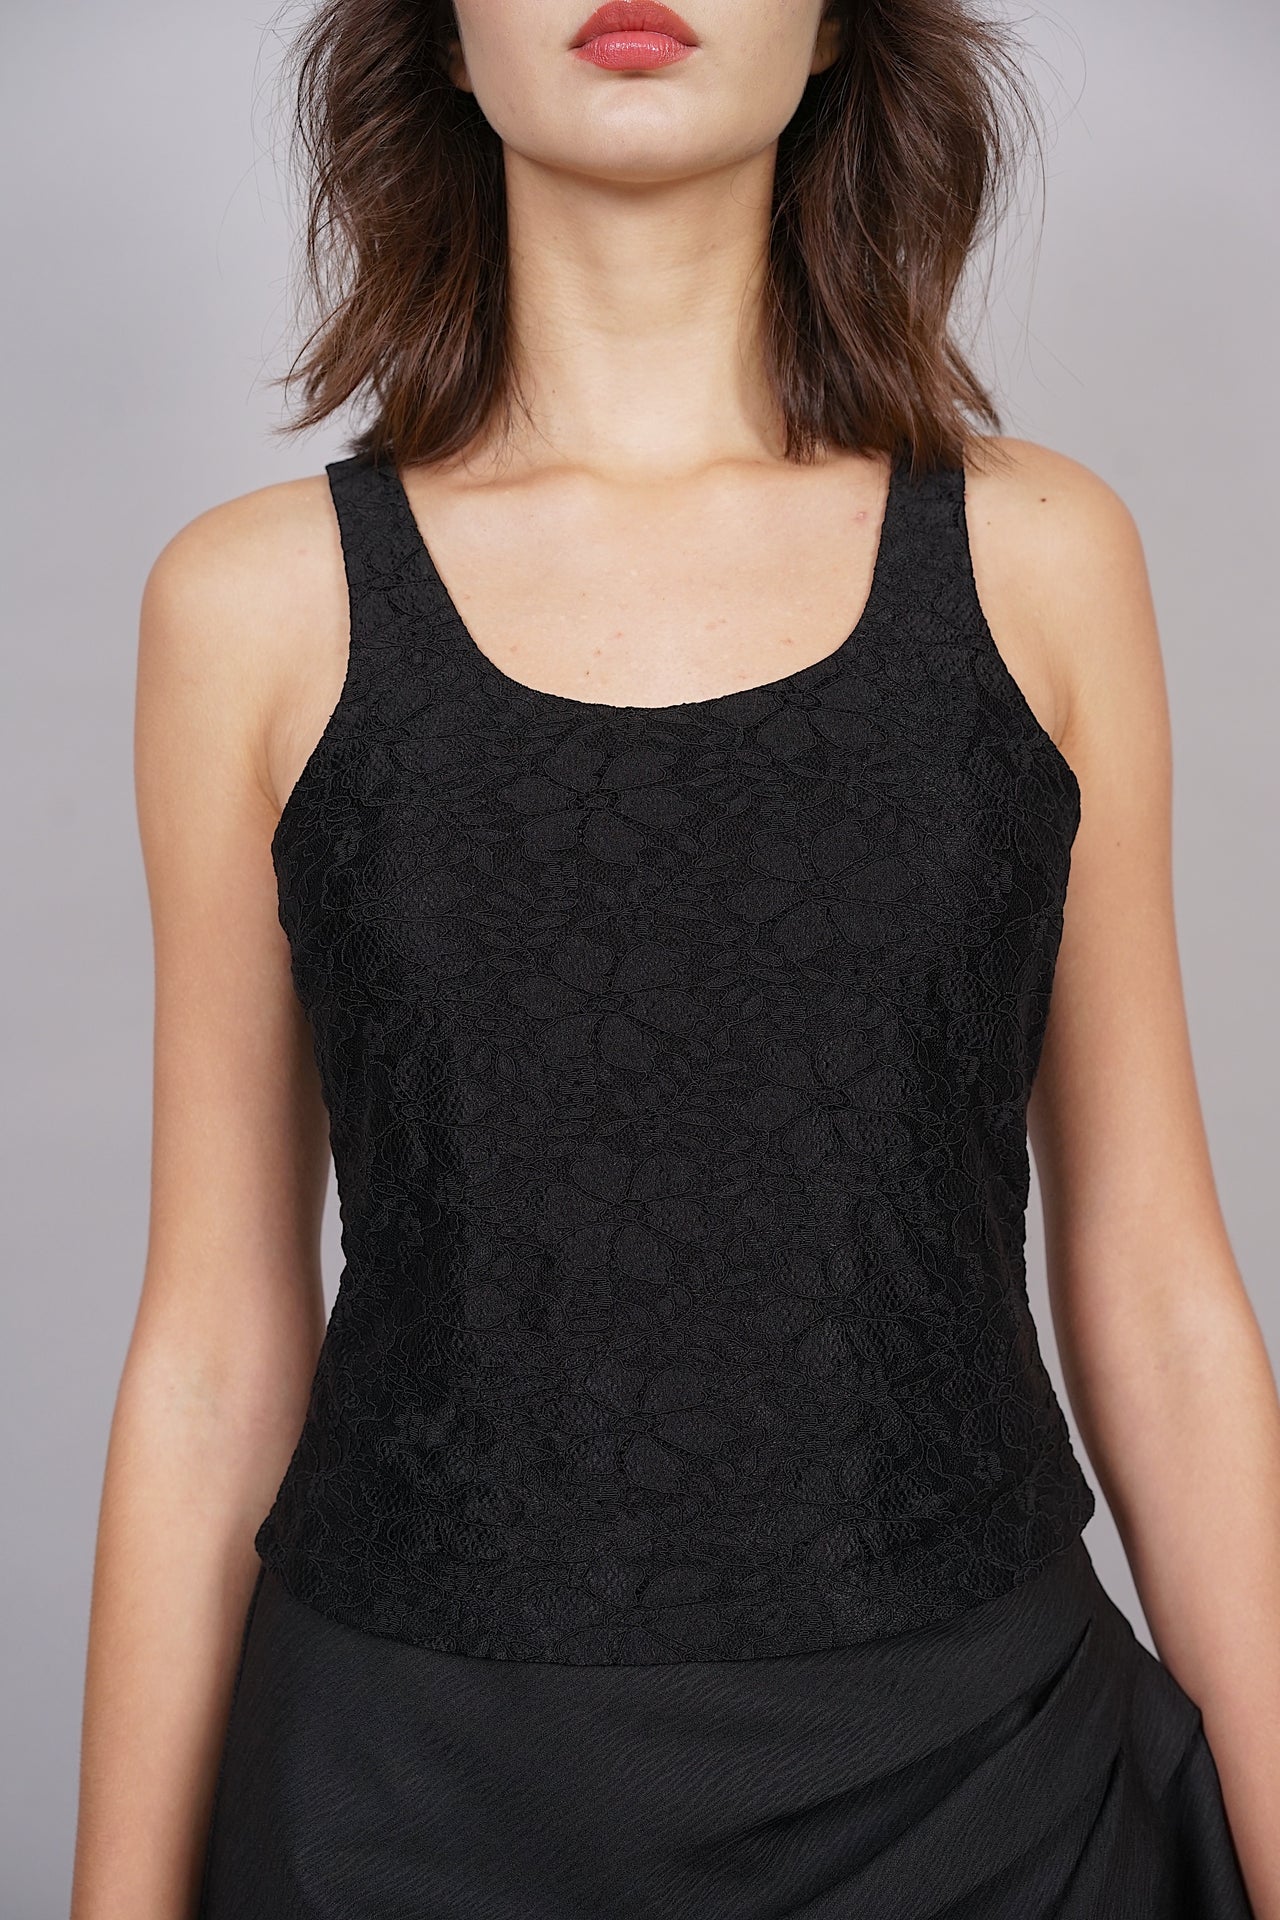 Lace Top in Black - Arriving Soon